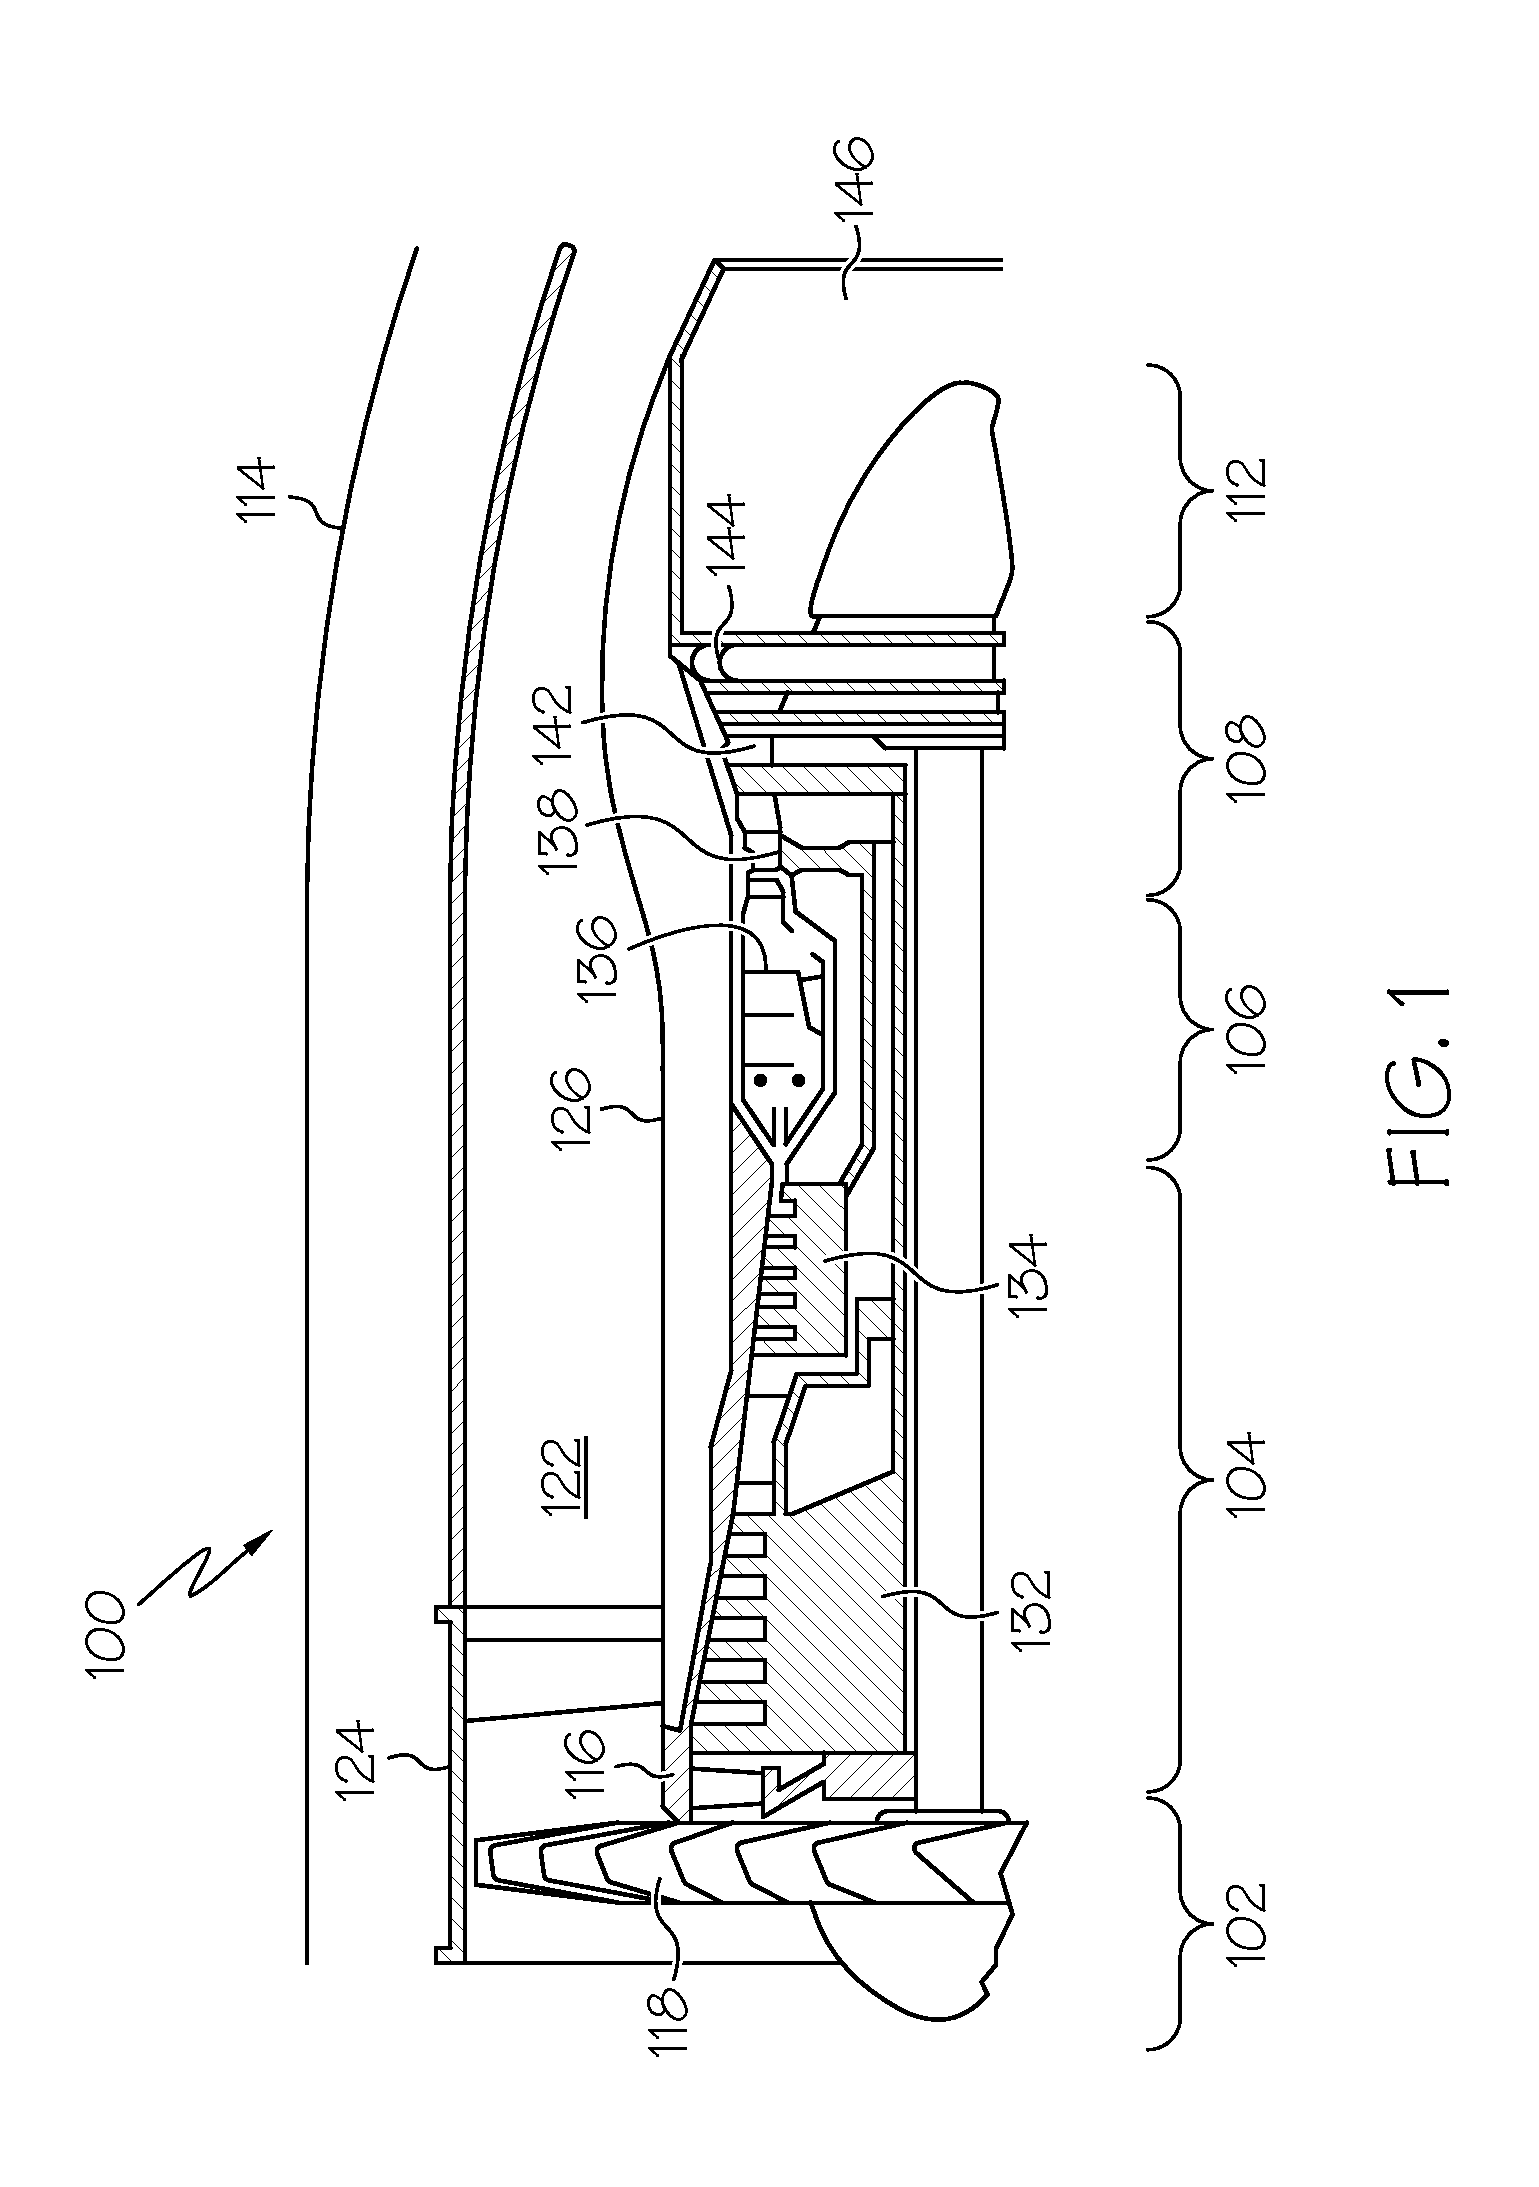 Unitary heat exchangers having integrally-formed compliant heat exchanger tubes and heat exchange systems including the same